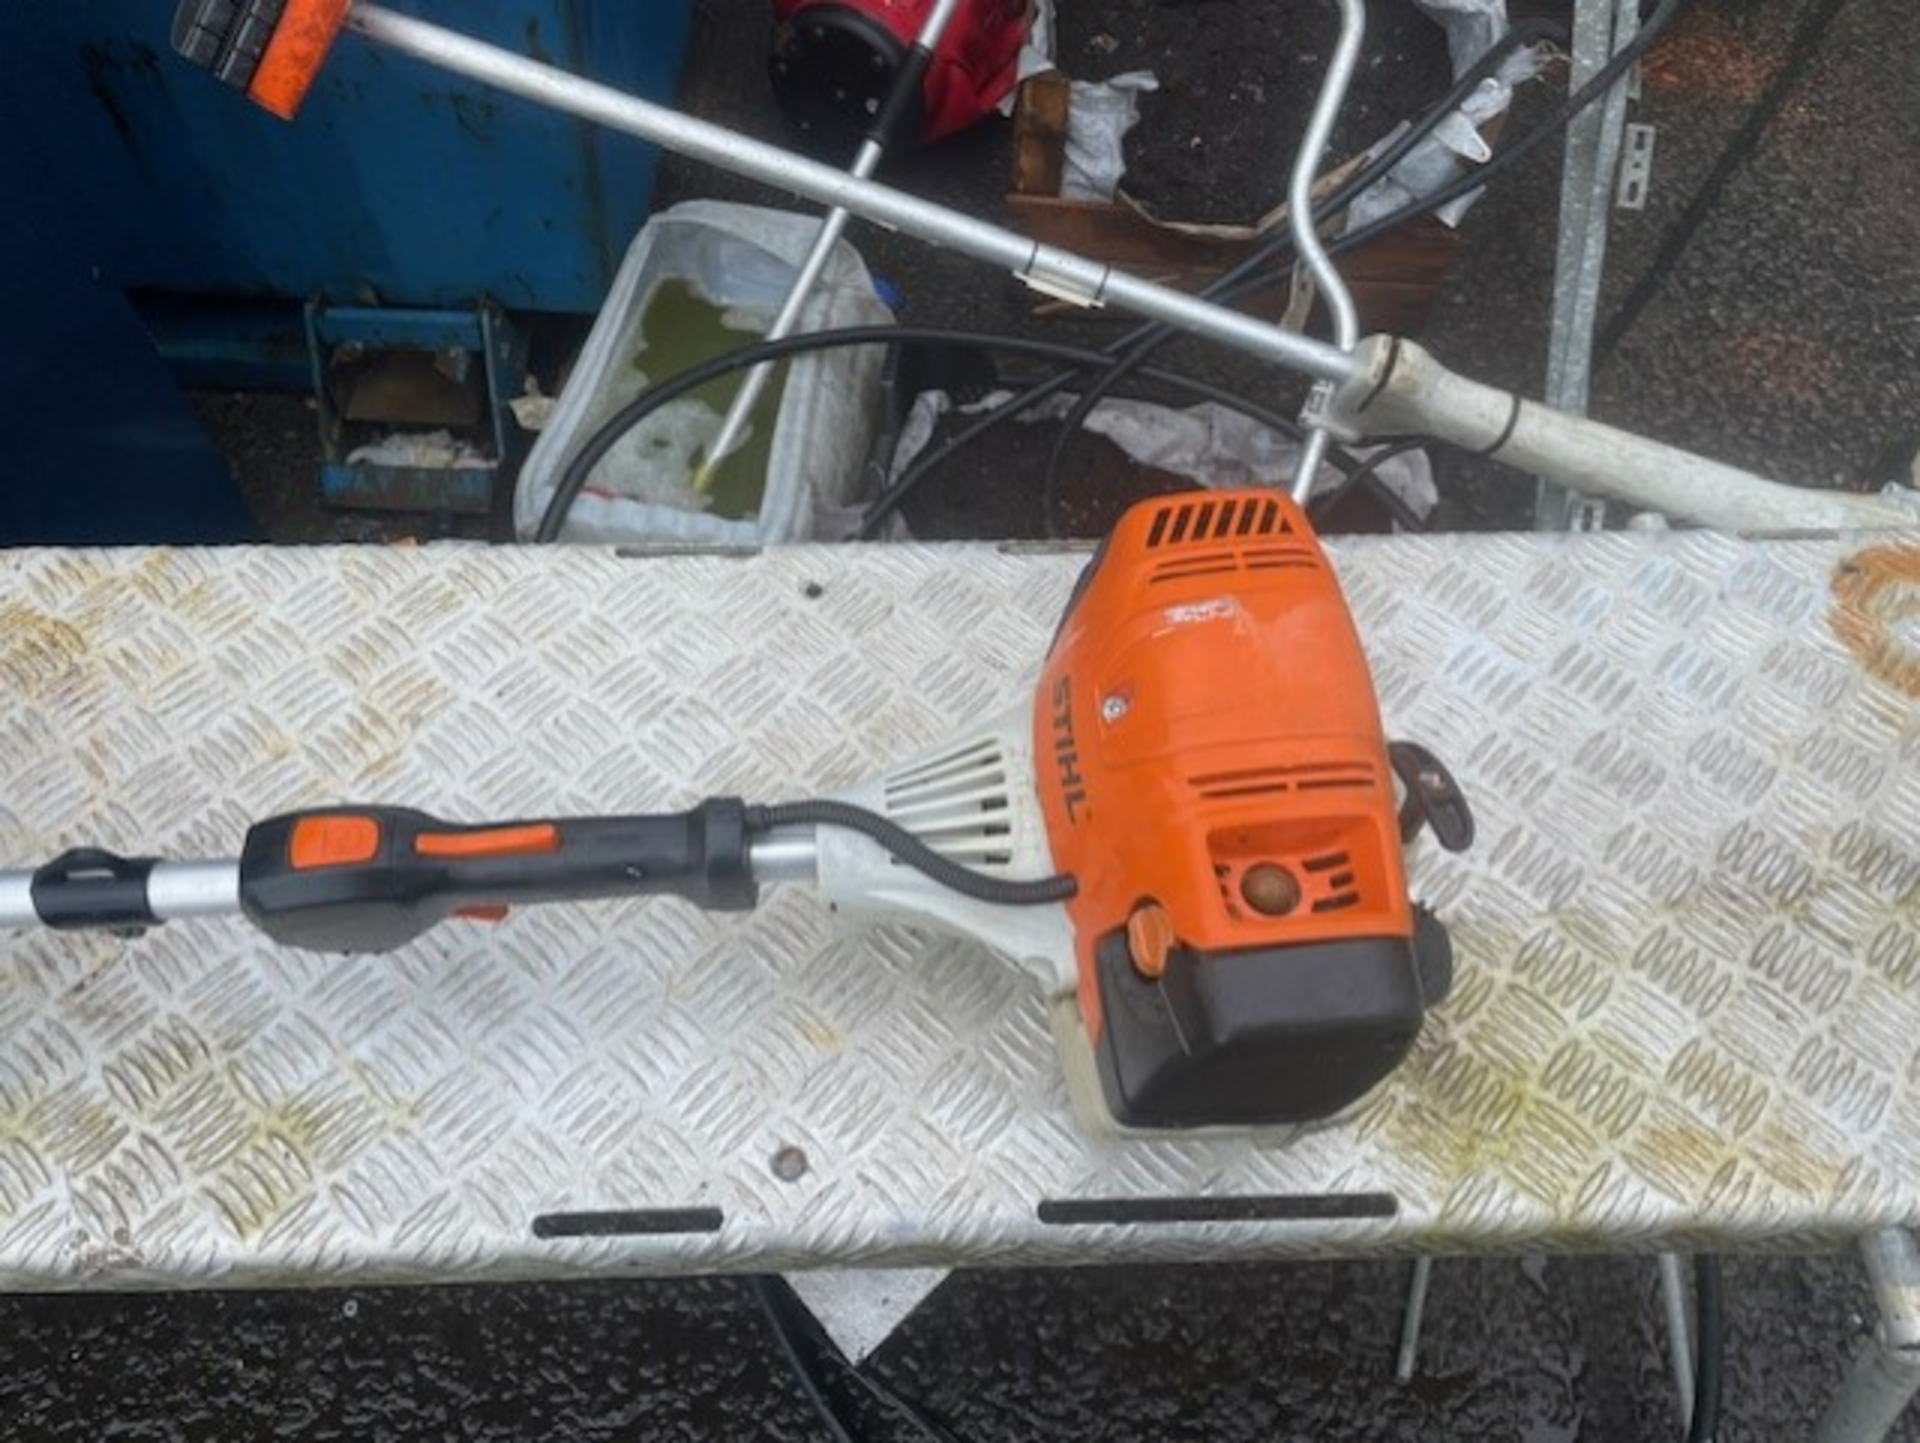 Stihl fs 111r strimmer good runner as per video sold with no warranty at all video says it all - Image 2 of 4